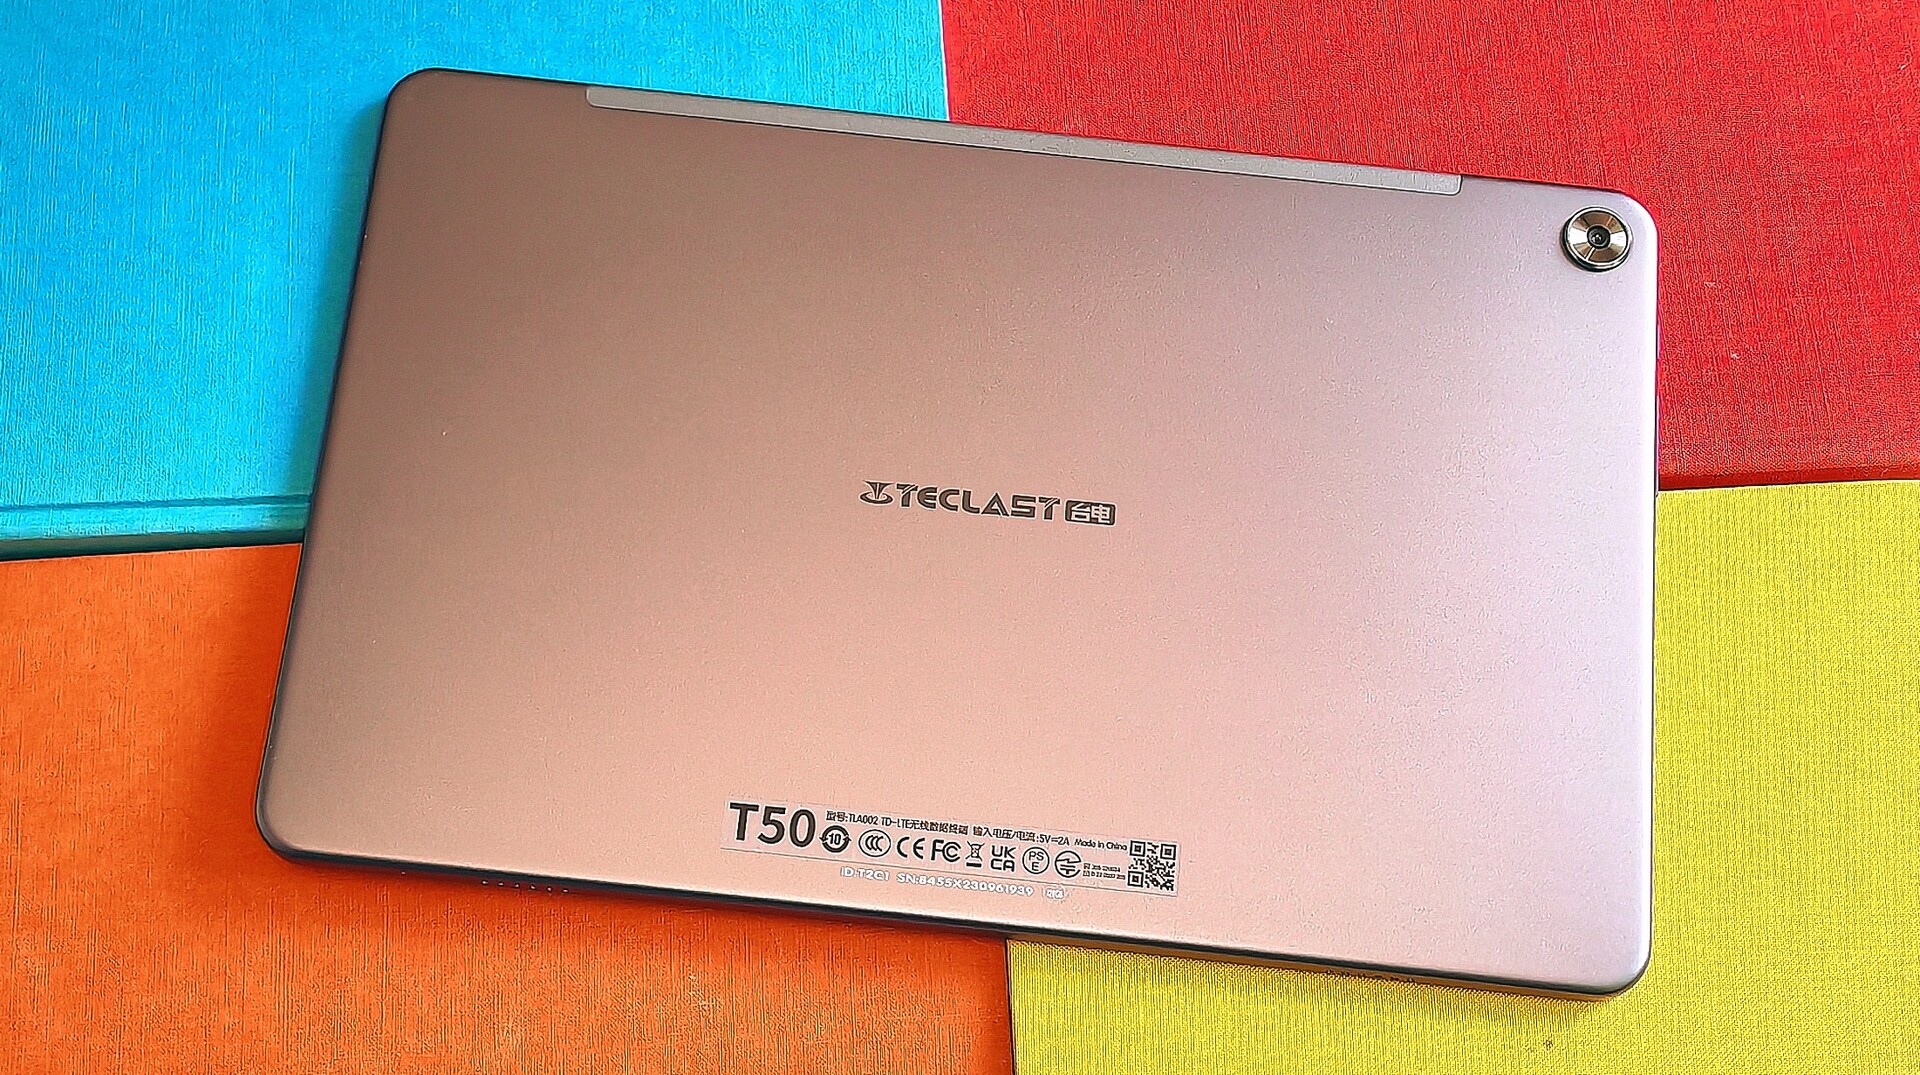 Teclast T50 Tablet review - The price-performance ratio rocks -   Reviews